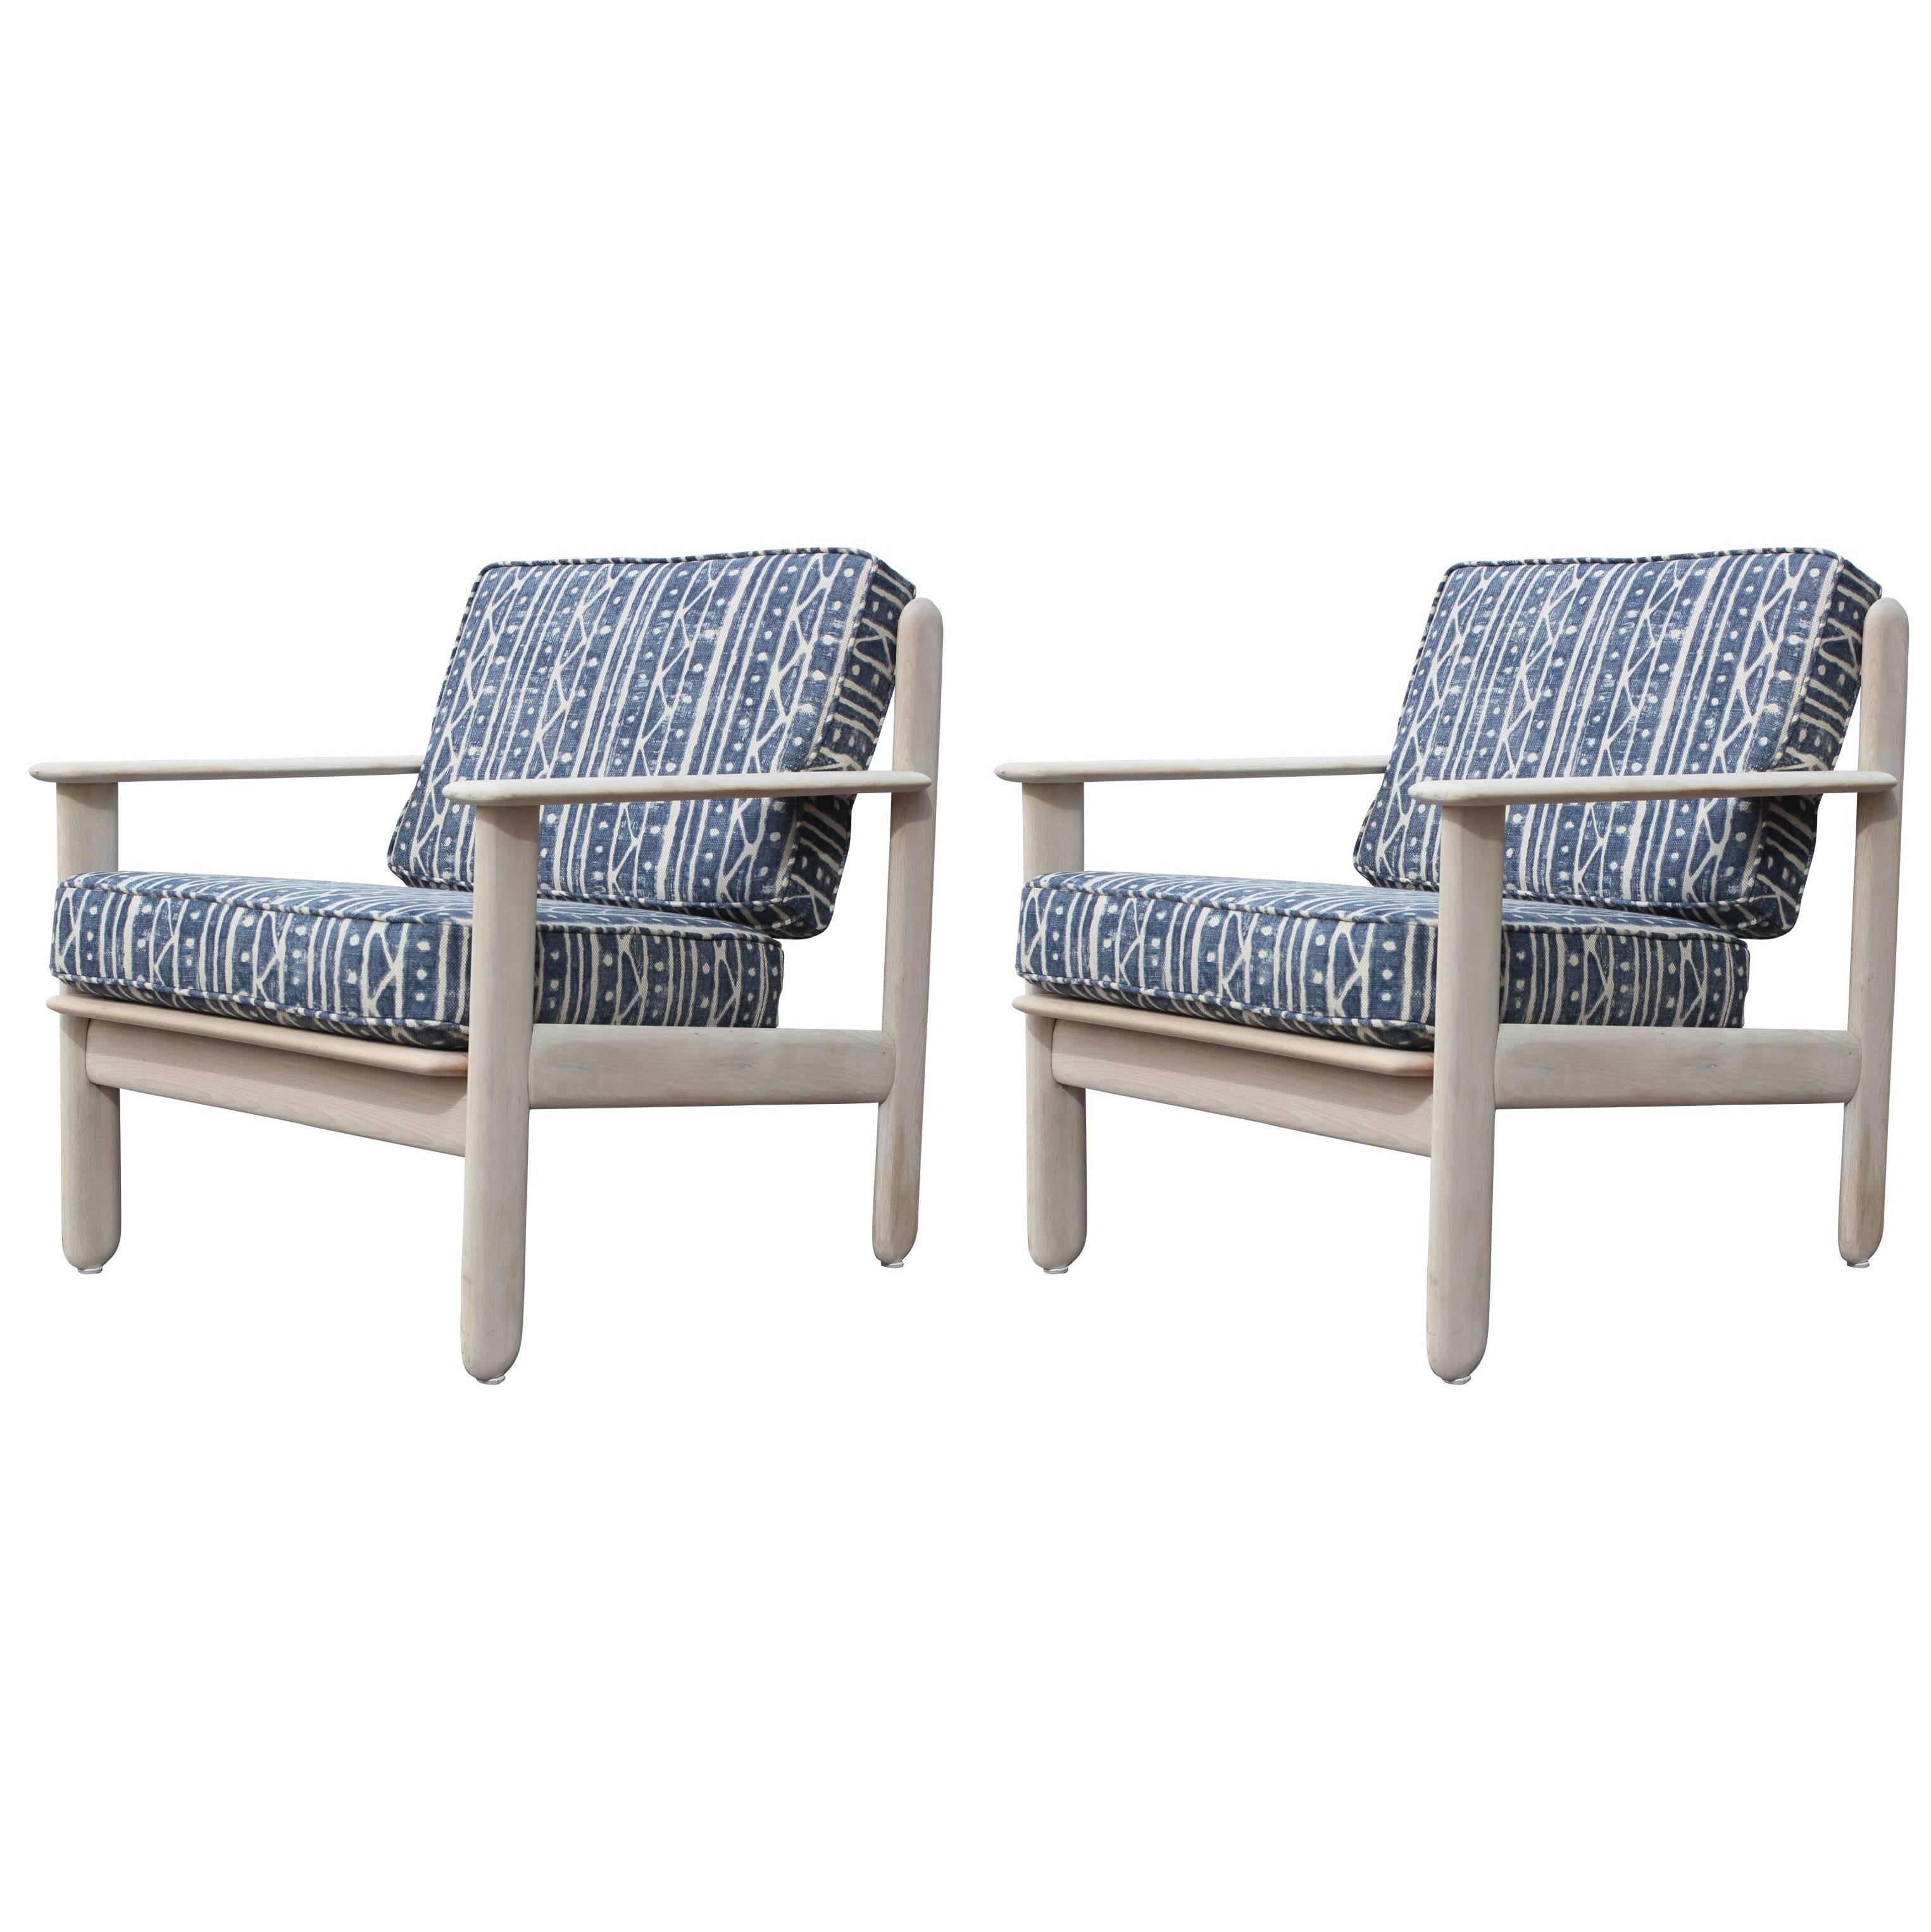 Pair of Modern Bleached Wood Italian Lounge Chairs in Indigo Blue & White Linen